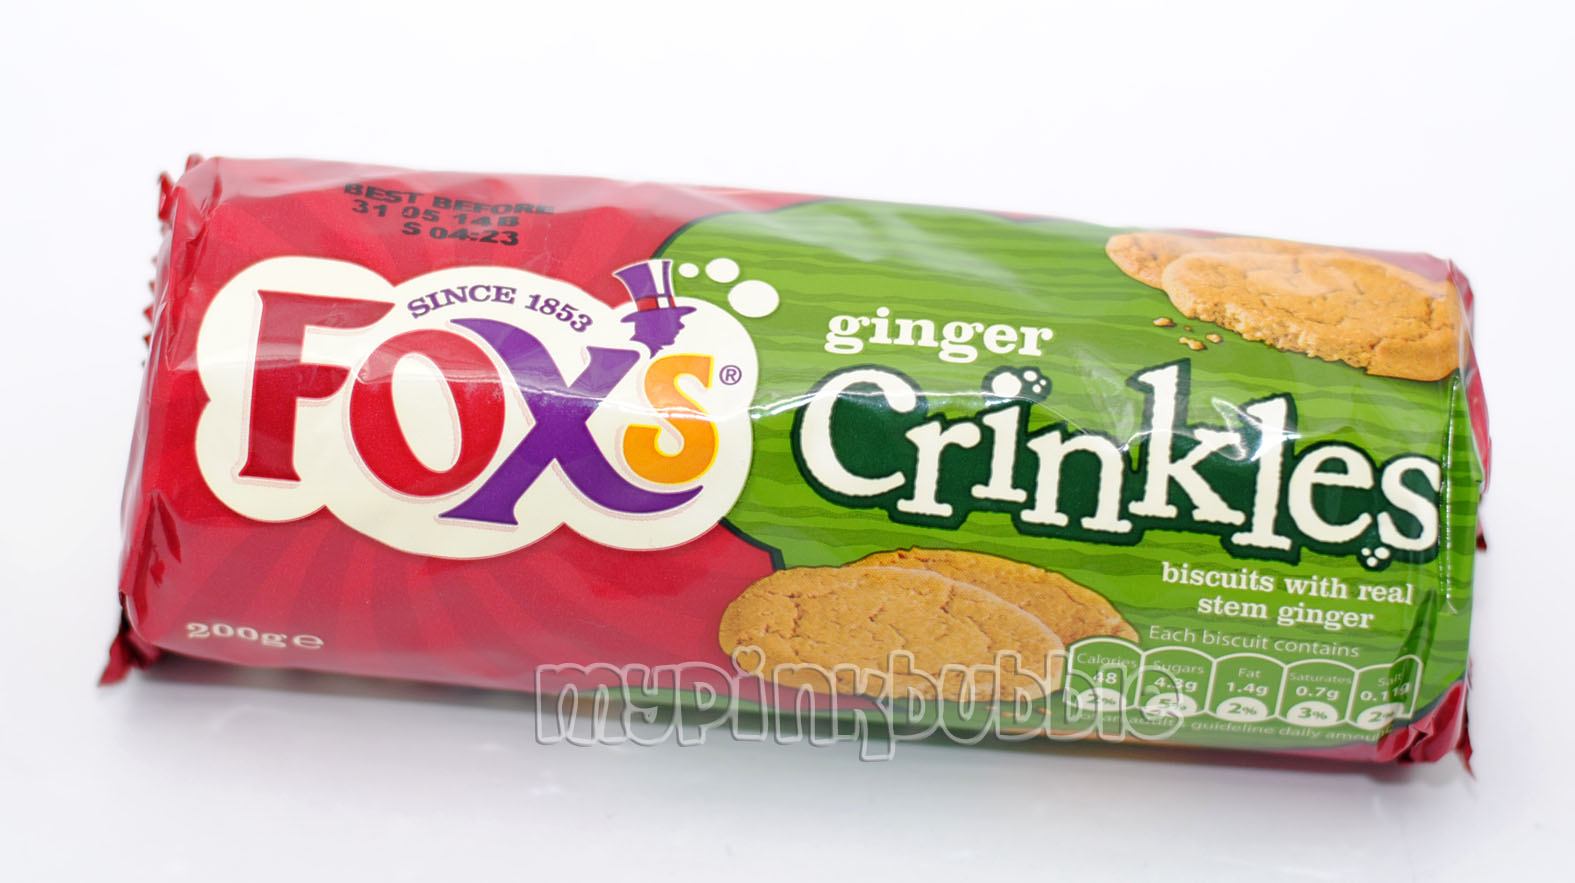 Fox’s ginger crinkly crunch